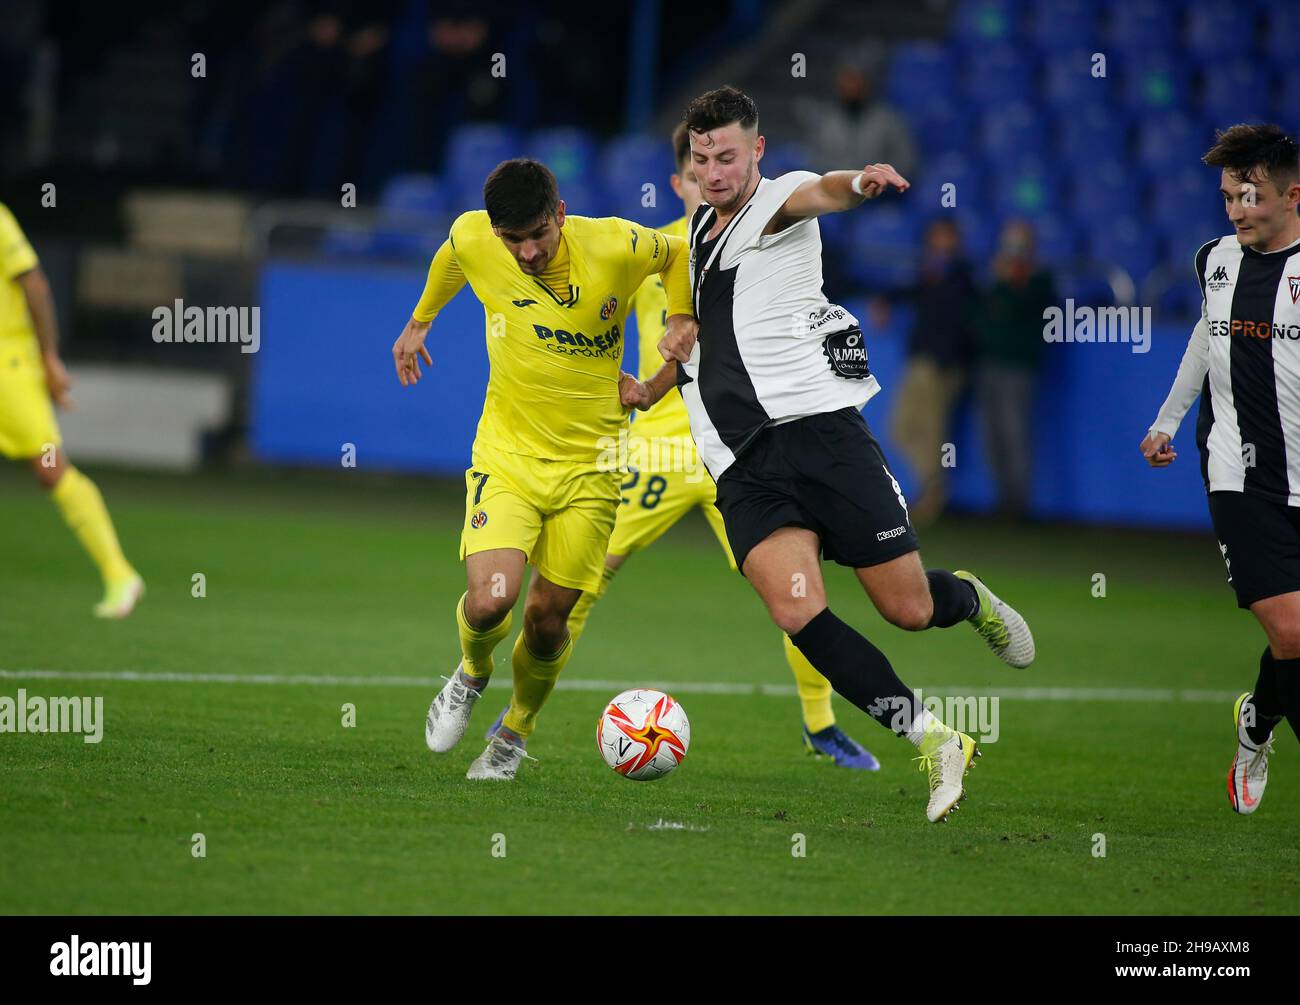 A Coruna-Spain.Gerard Moreno(forward) in action during the football match of Spanish King's Cup between Victoria CF and Villarreal in Riazor Stadium o Stock Photo